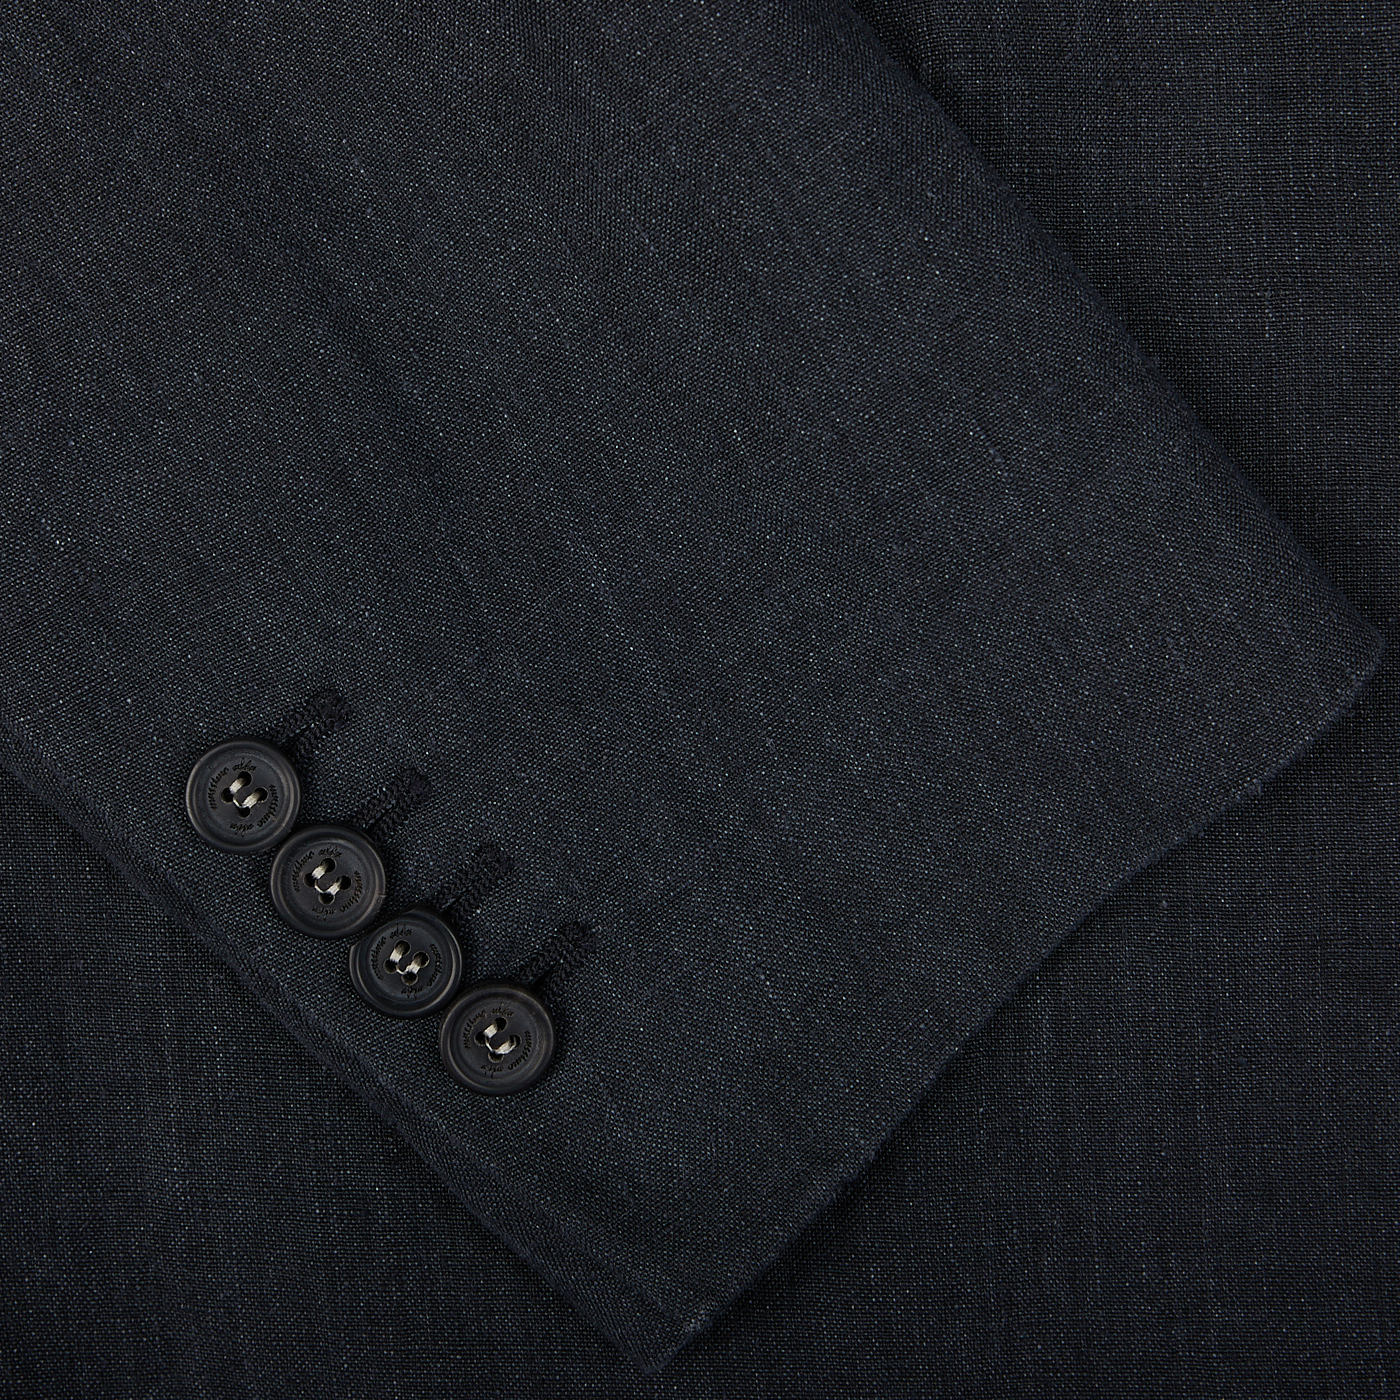 Four black buttons on a dark fabric of an Massimo Alba Black Washed Linen Unstructured Blazer, possibly a sleeve detail of the garment.